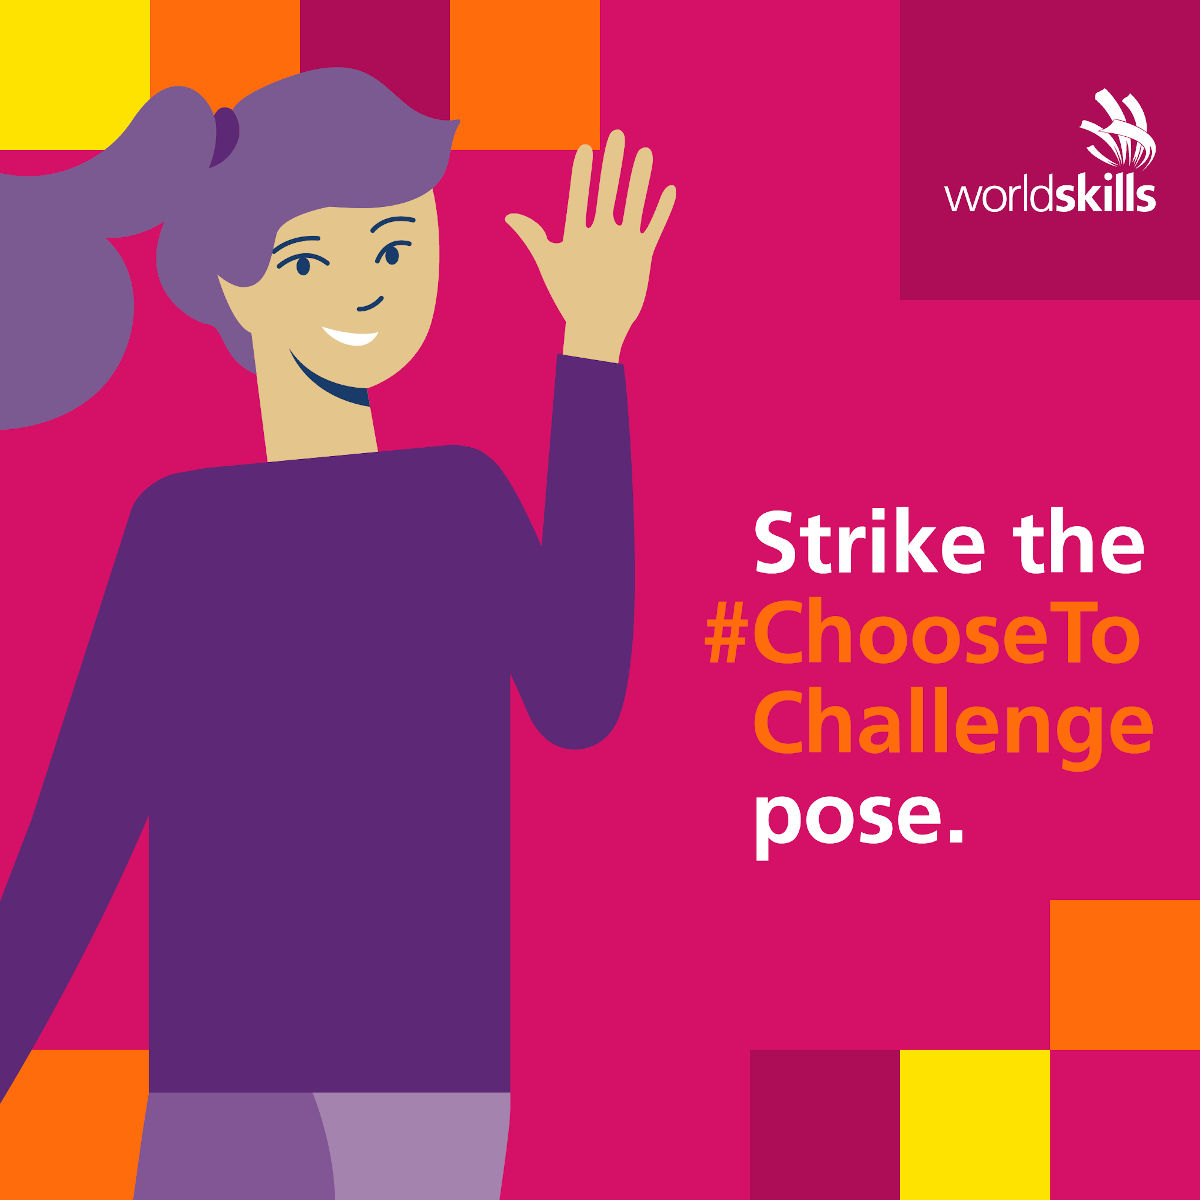 A promotional image for WorldSkills content theme in March 2021 - #ChooseToChallenge, which celebrated women in skills